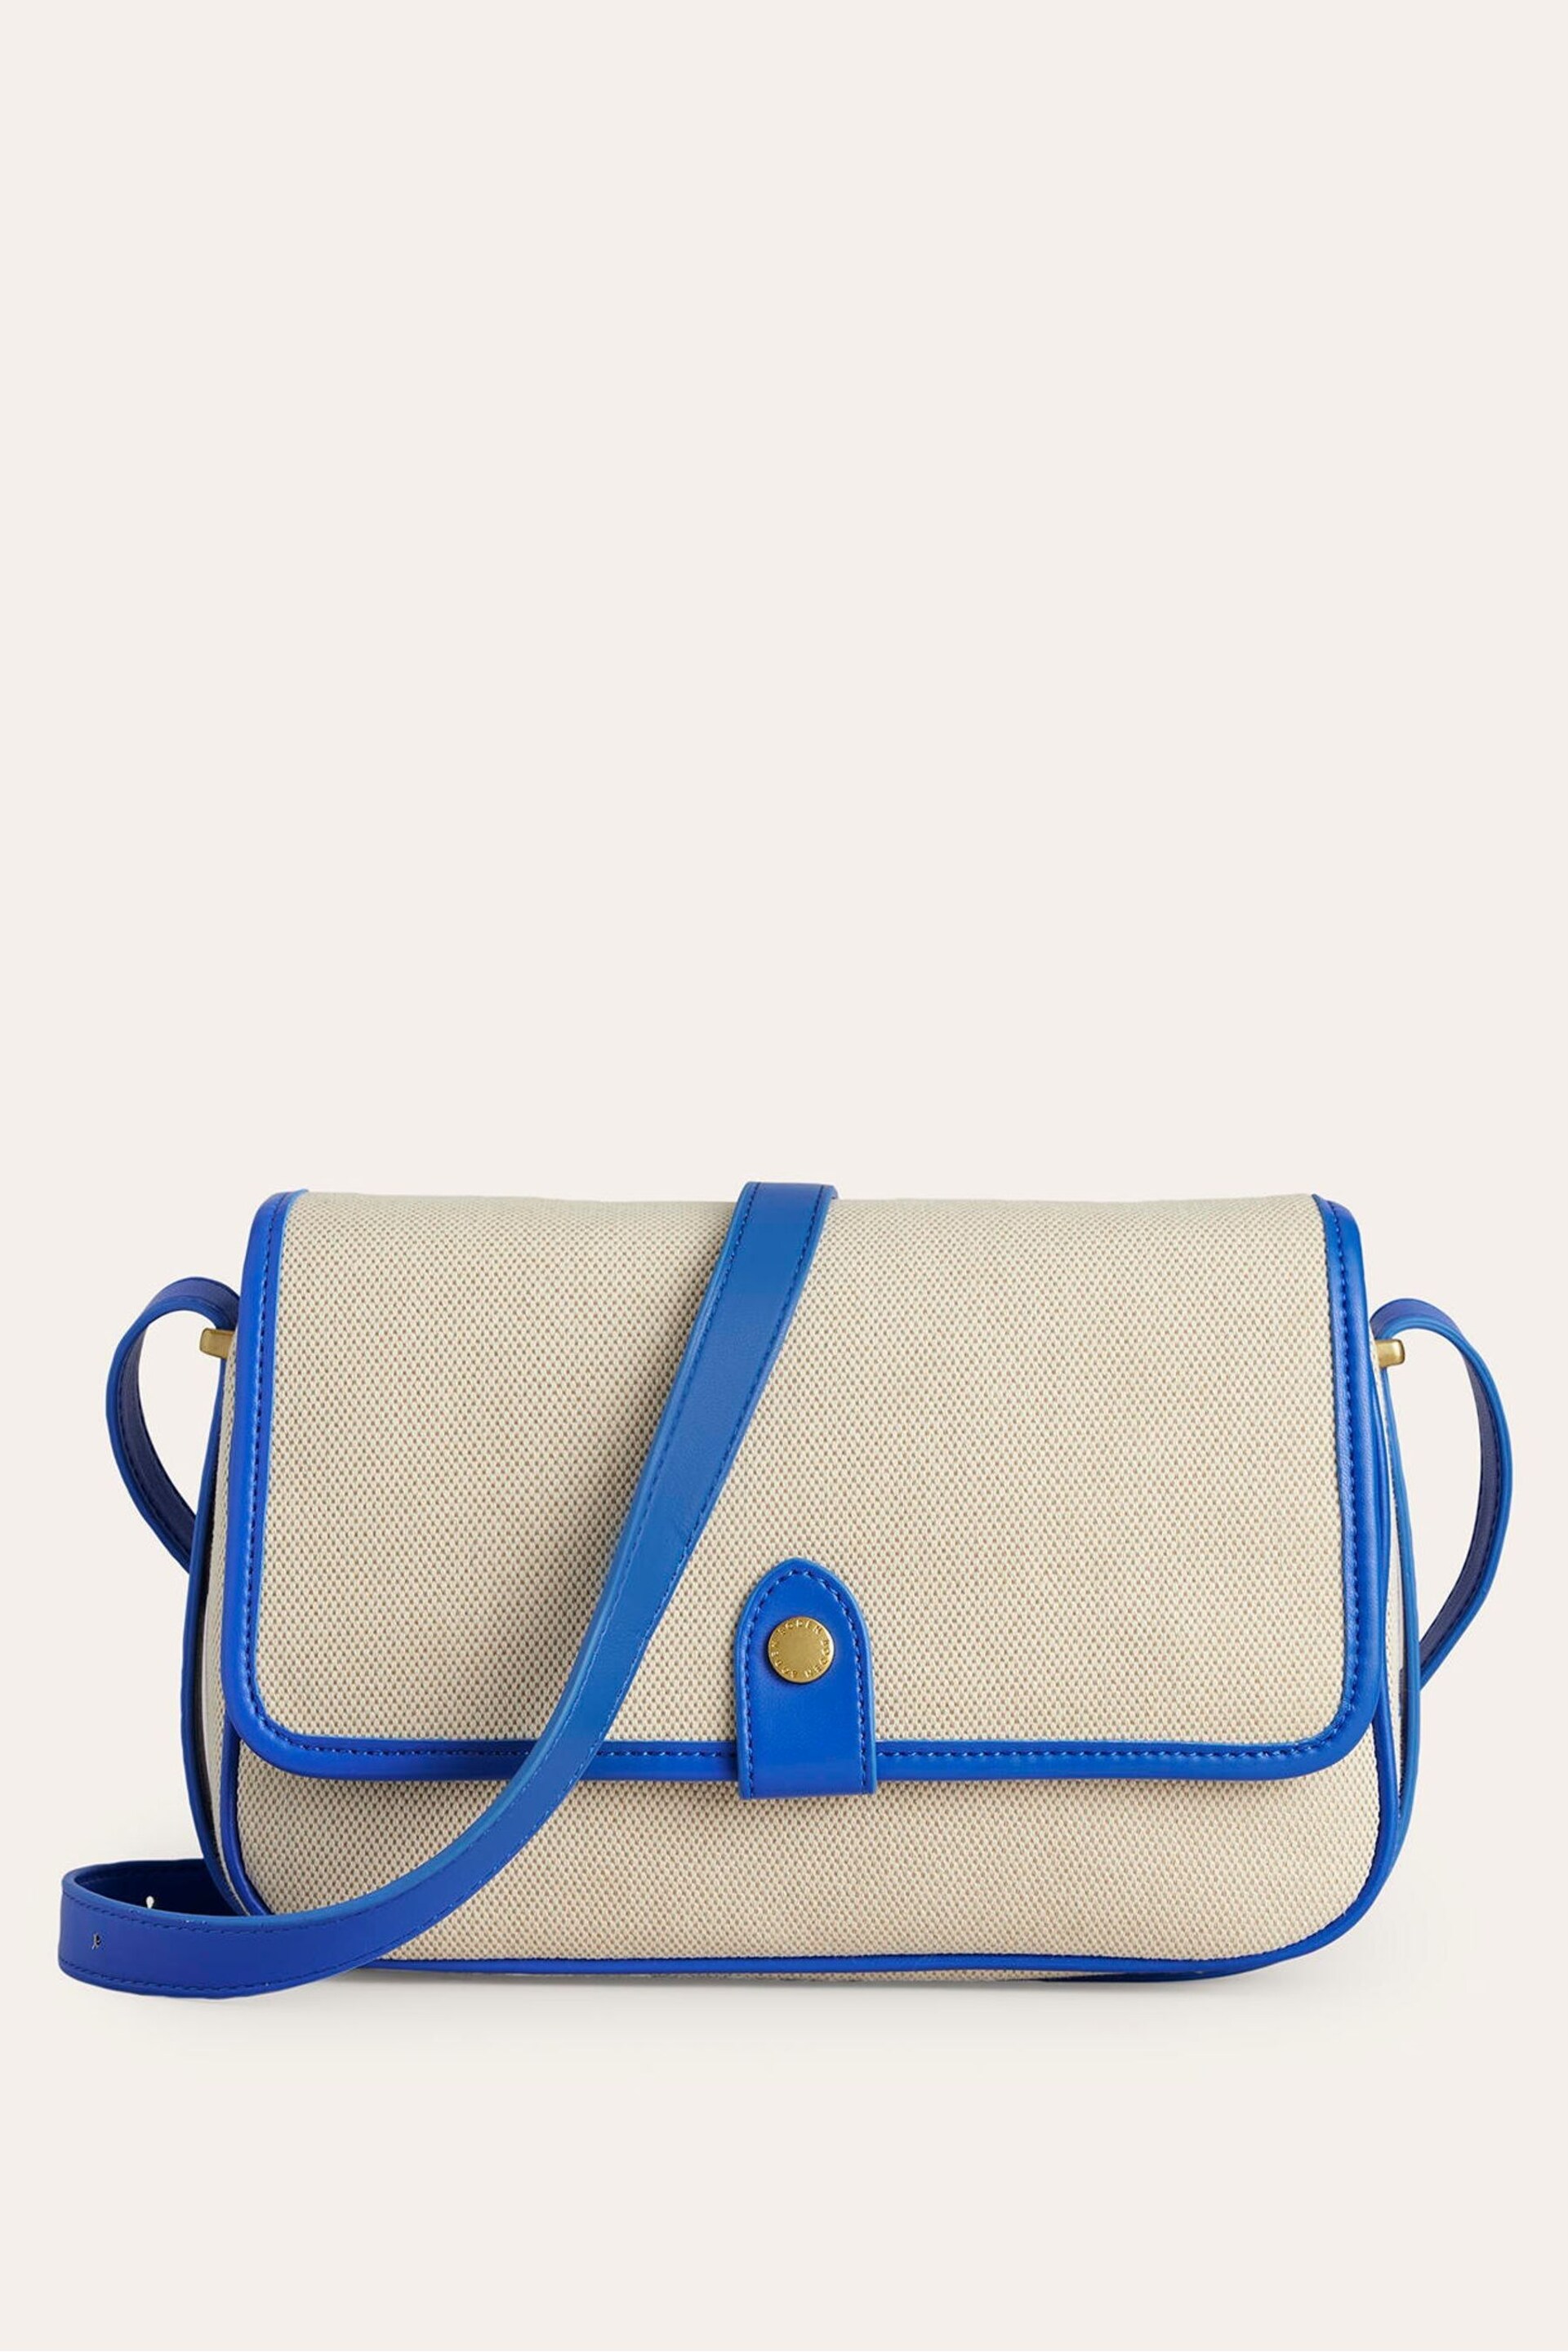 Boden Natural Structured Cross-body Bag - Image 1 of 4